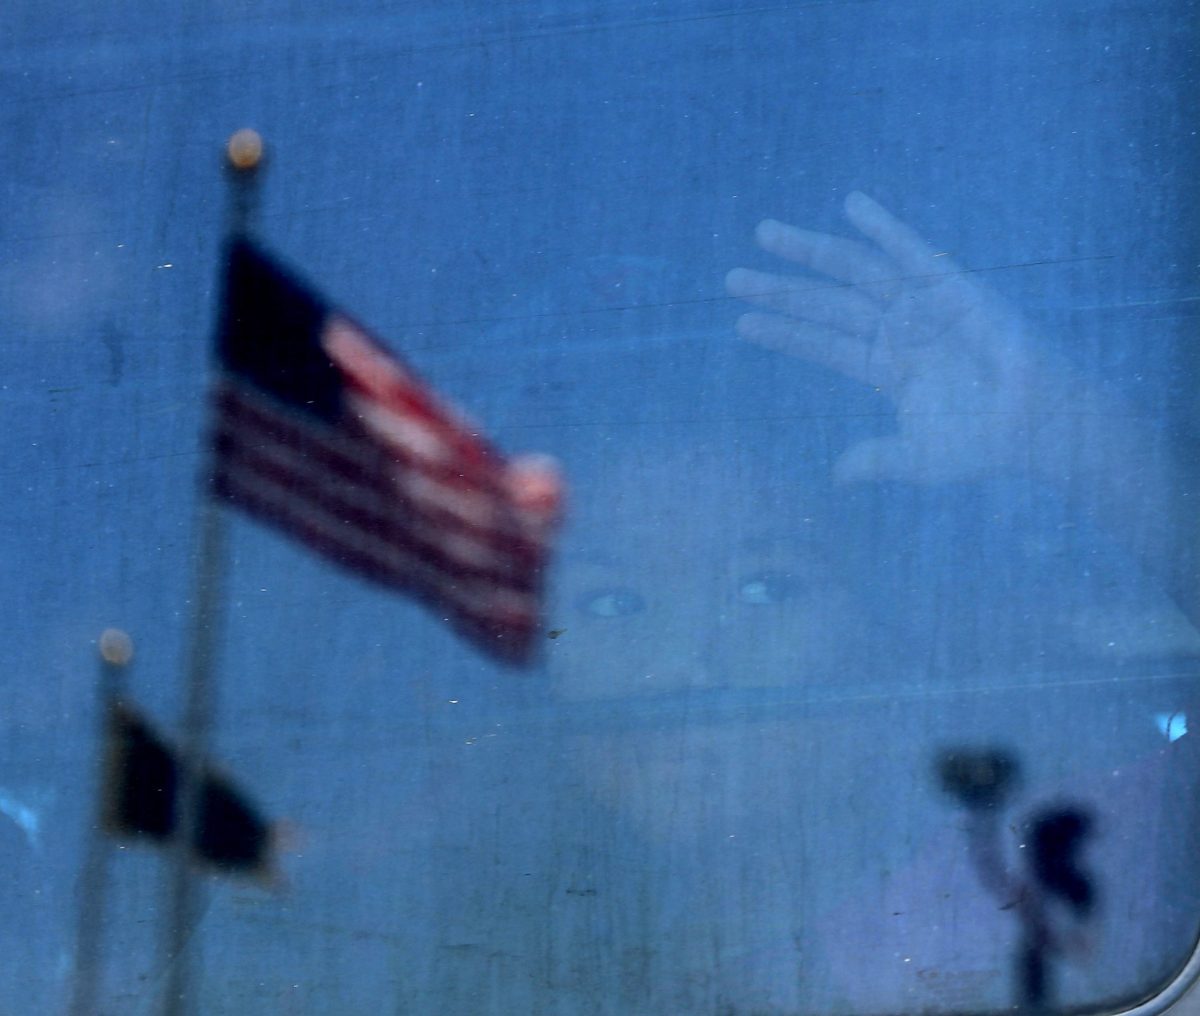 A child looks out of the window of a bus, in the reflection of the window you can see two American flags.